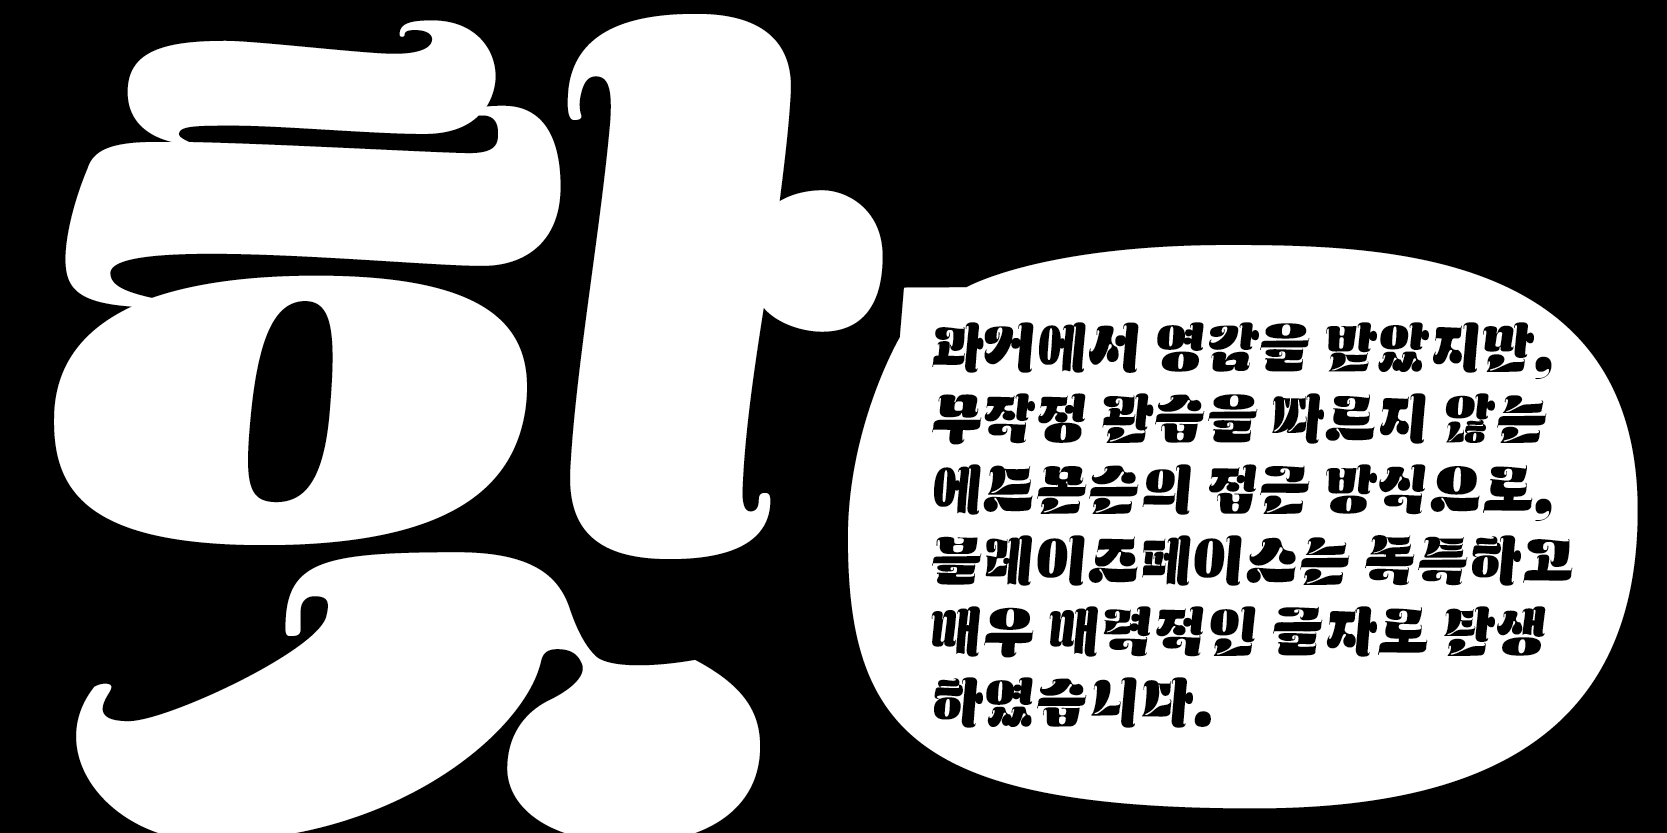 Card displaying Blazeface Hangeul typeface in various styles